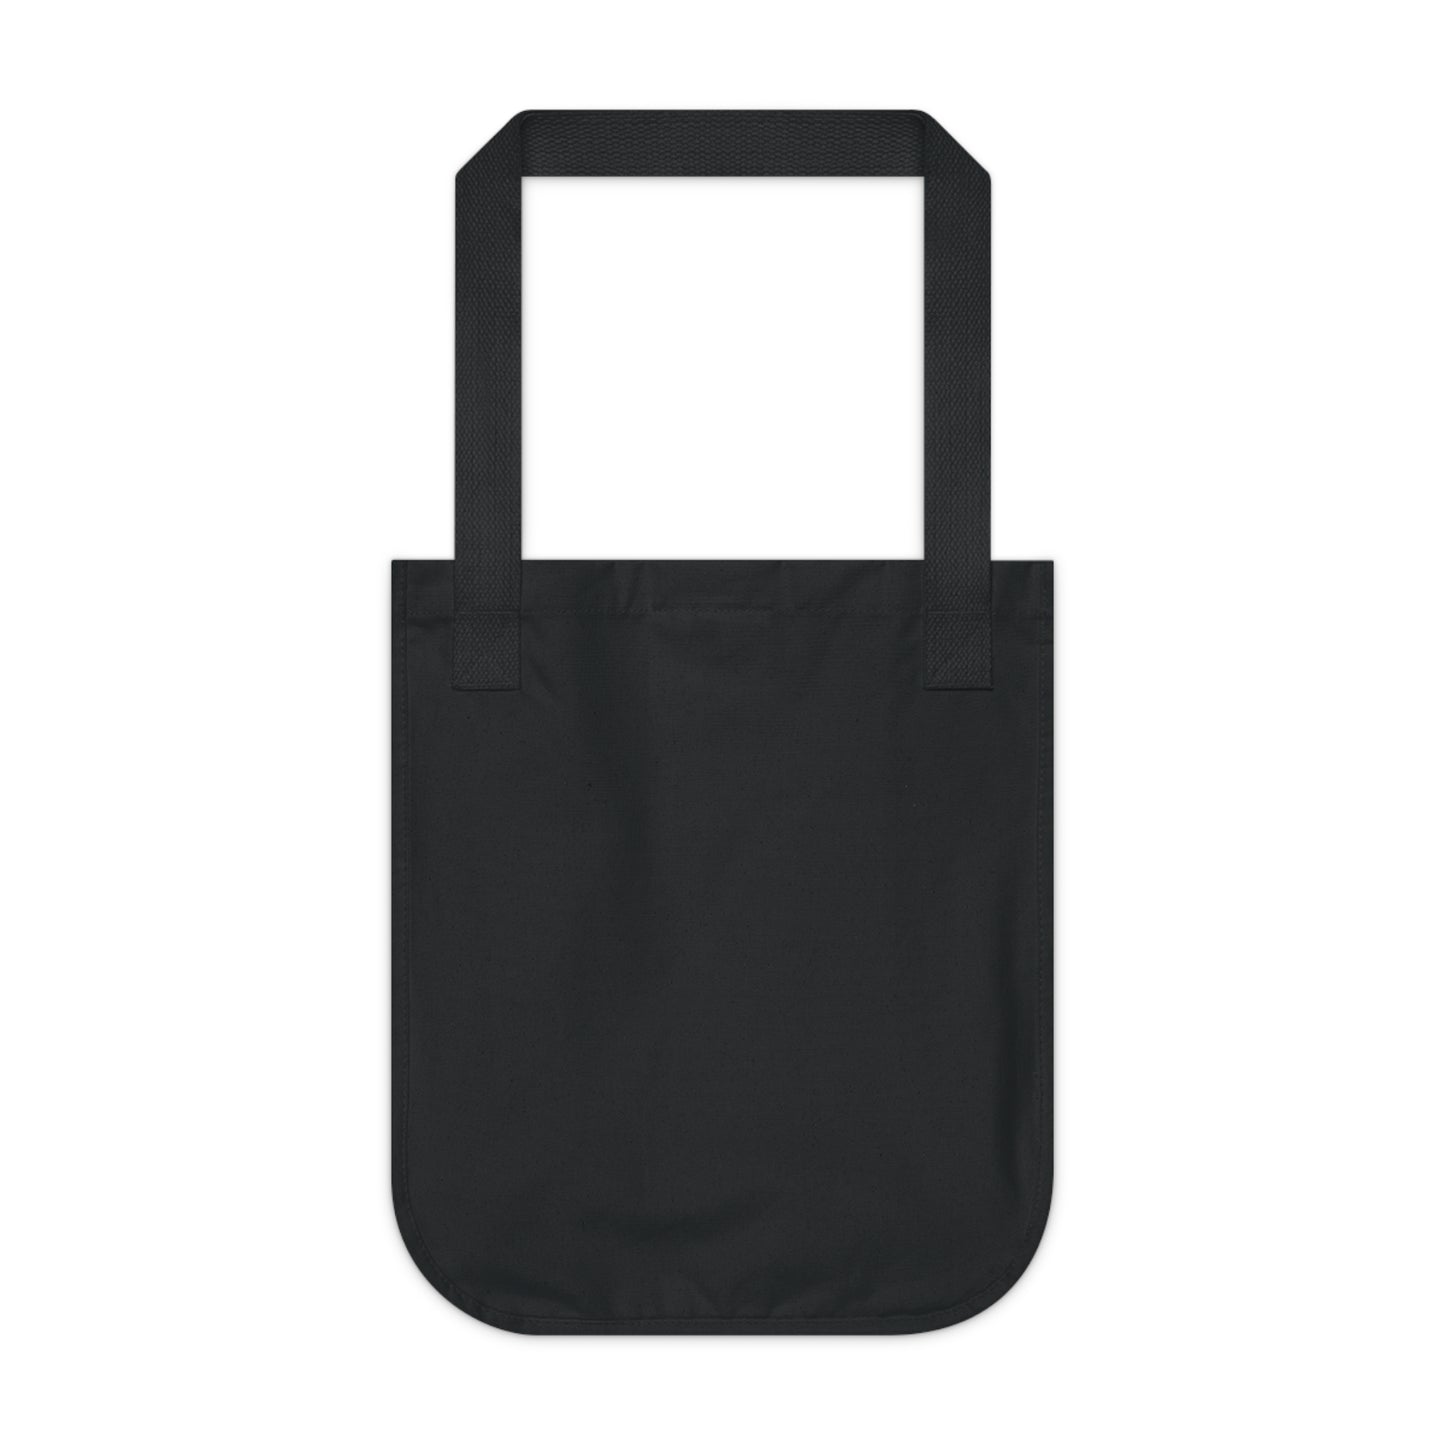 "A Multihued Emotion: An Exploration of Color, Contrast, and Light" - Bam Boo! Lifestyle Eco-friendly Tote Bag